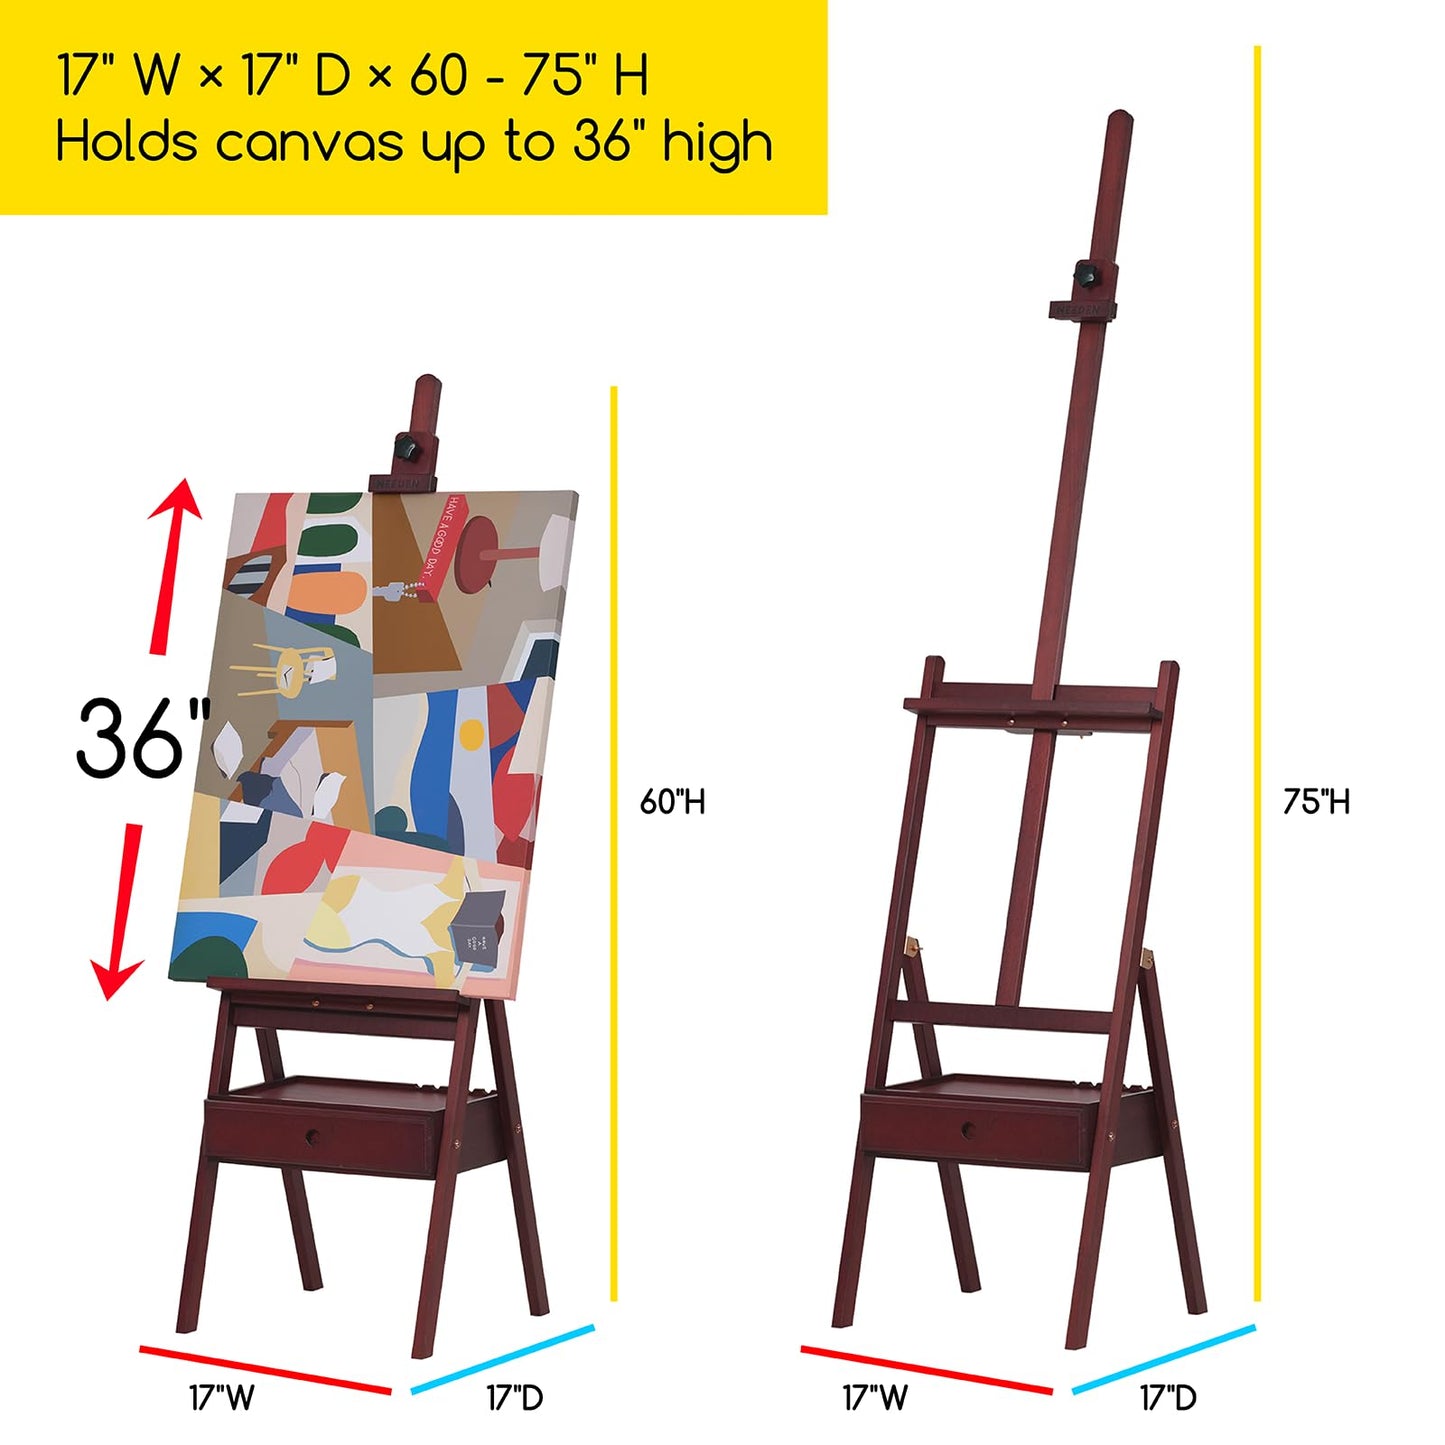 MEEDEN Studio H-Frame Easel with Art Supply Storage Drawer - Adjustable (60"~75") Wood Easel Stand for Artists, Adults and Students, Holds Canvas Art